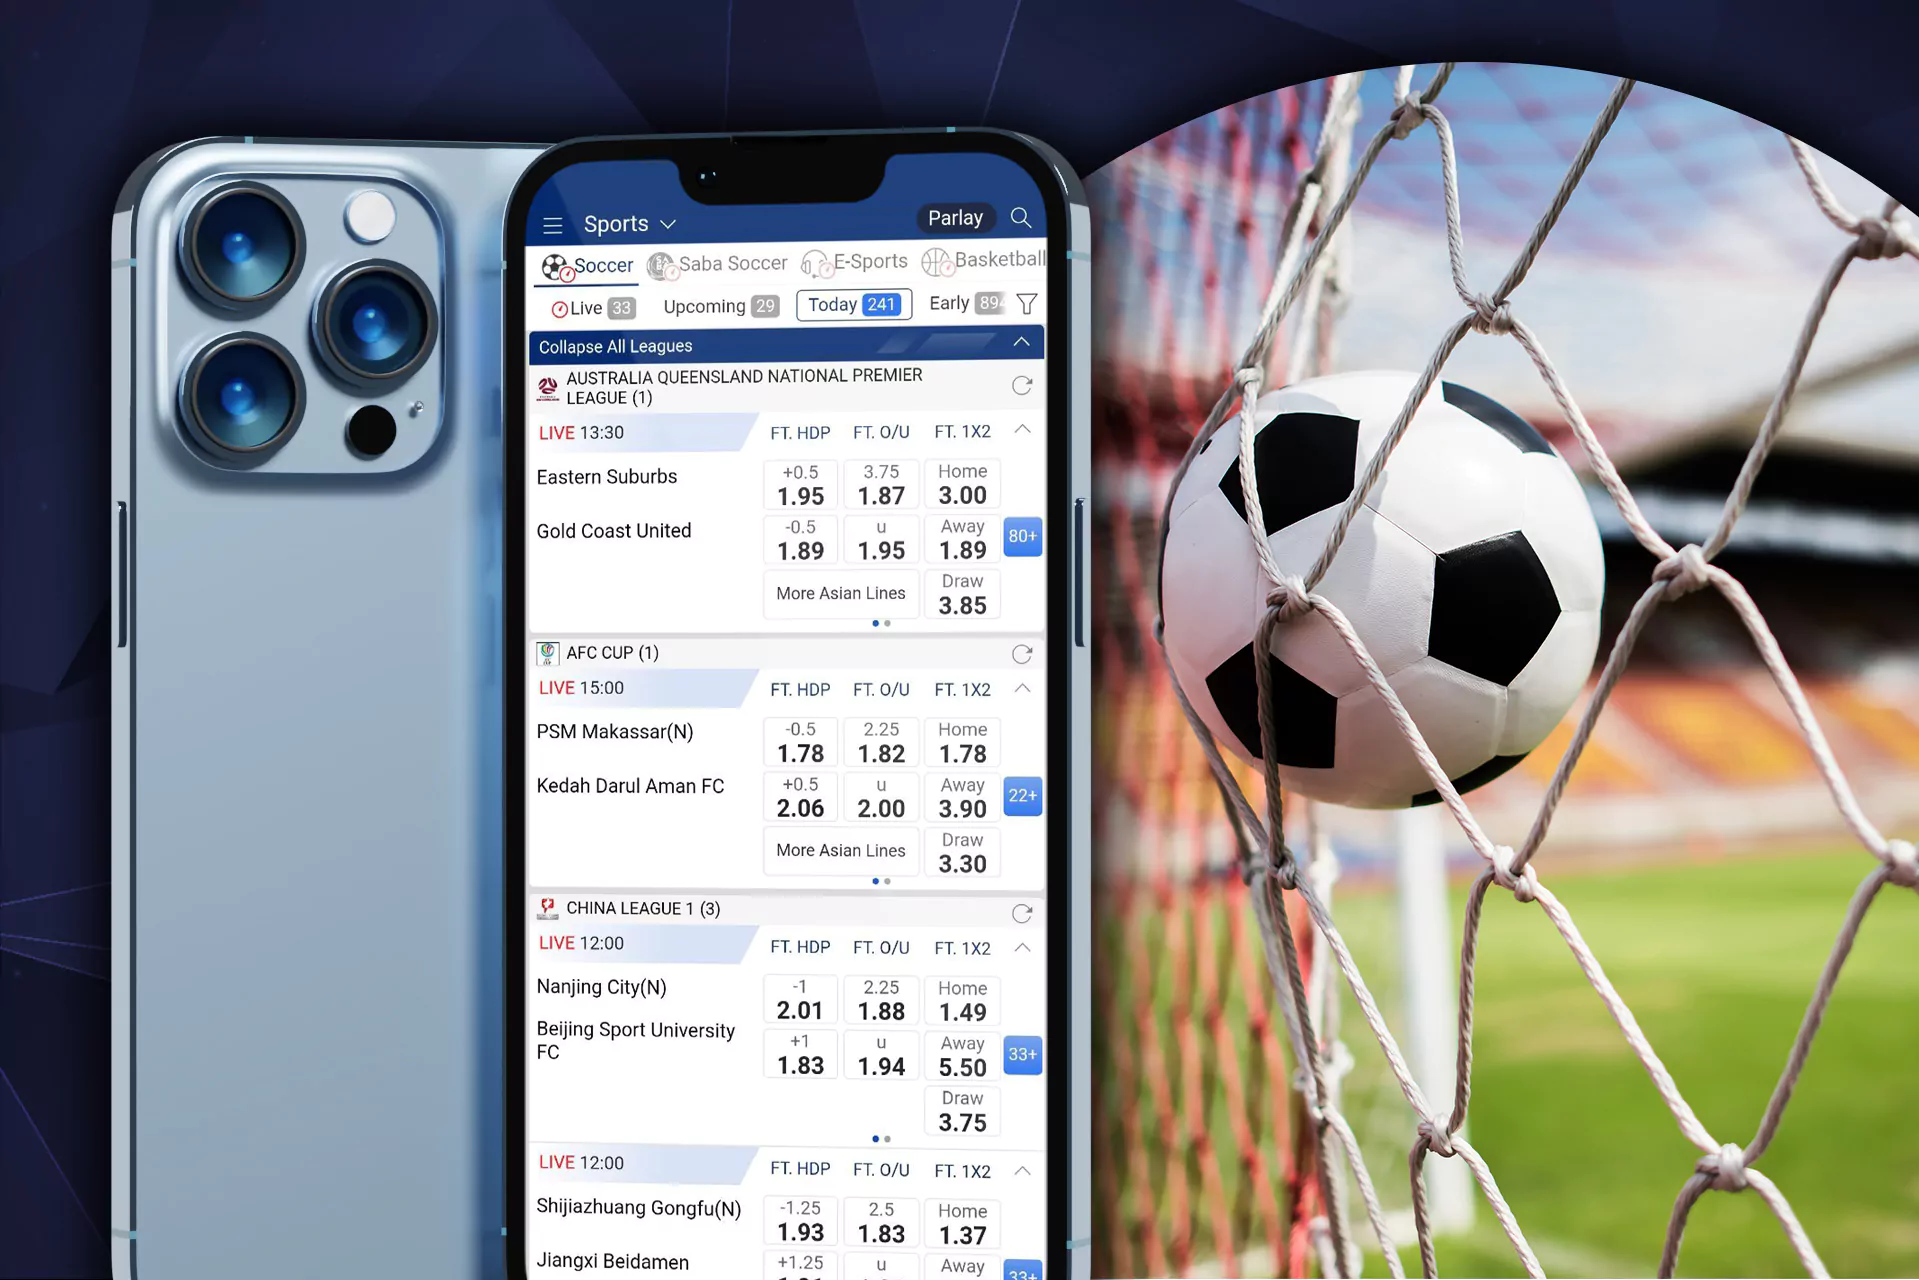 Choose a football match and place a bet on the result.